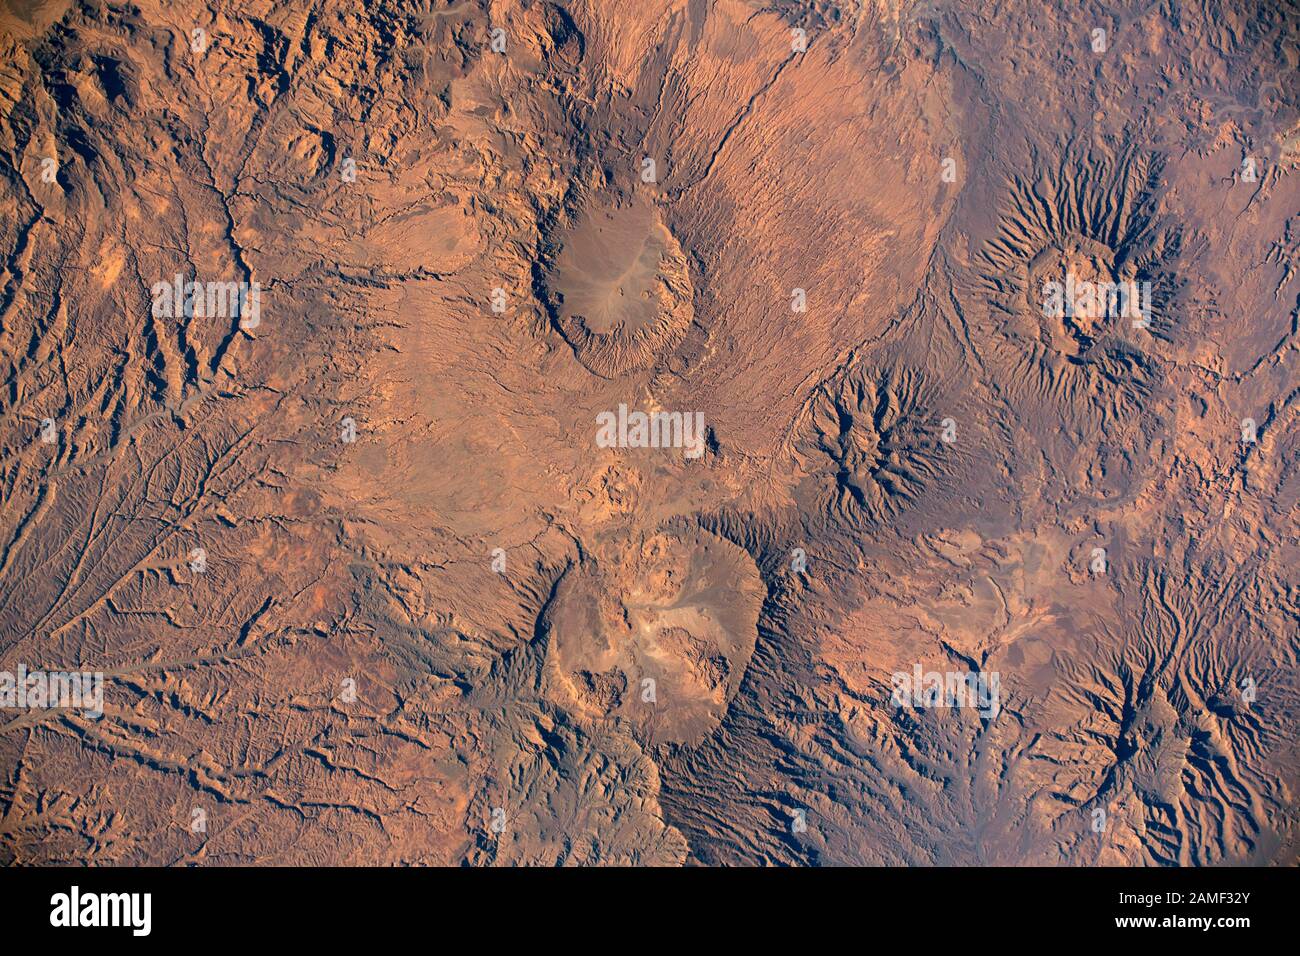 CHAD - 20 Dec 2019 - The Tibesti Mountains in the African nation of Chad are pictured as the International Space Station orbited 259 miles above the c Stock Photo